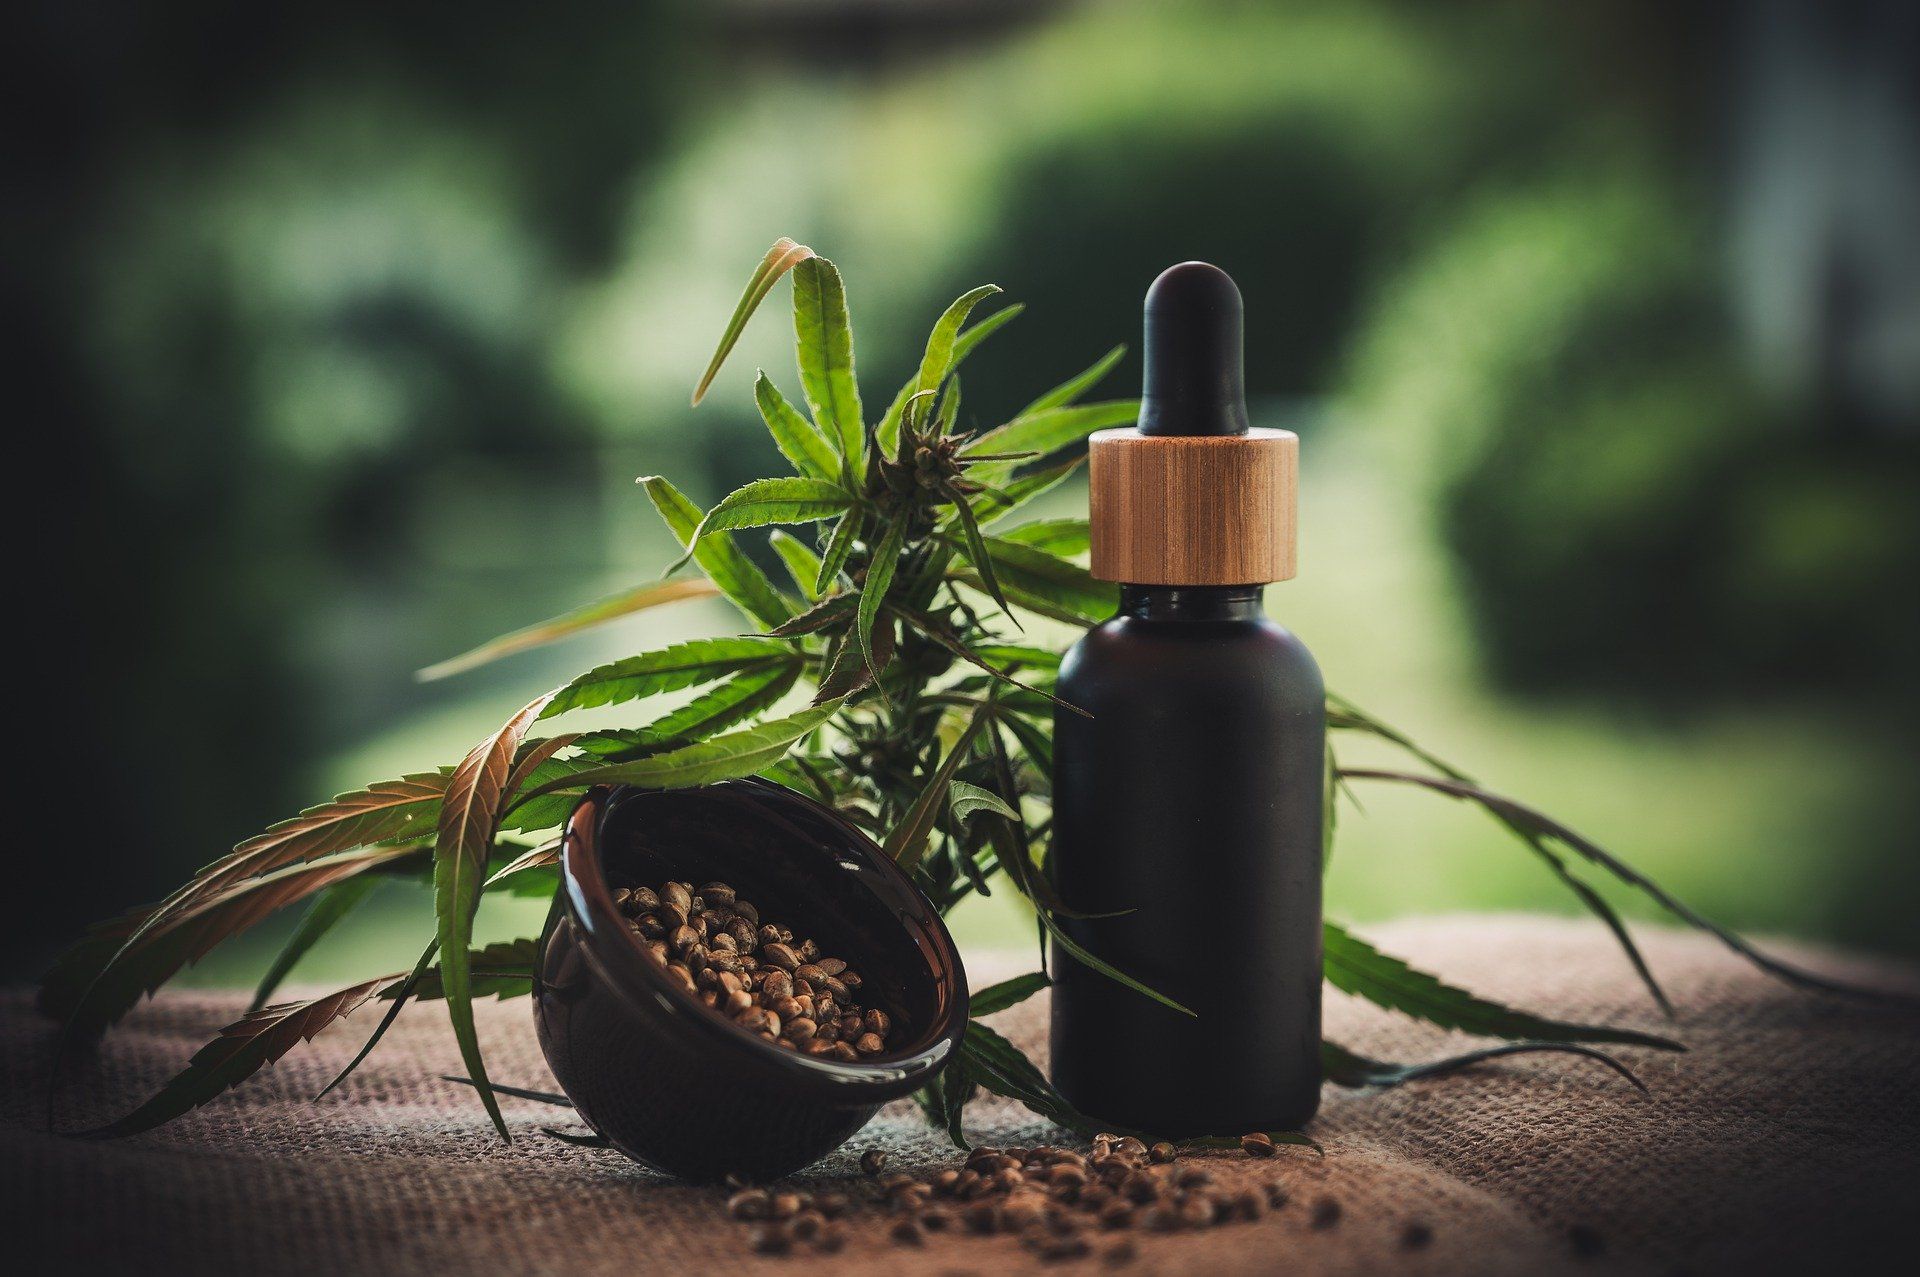 hemp-leaves-seeds-and-oil-dropper-in-shallow-focus